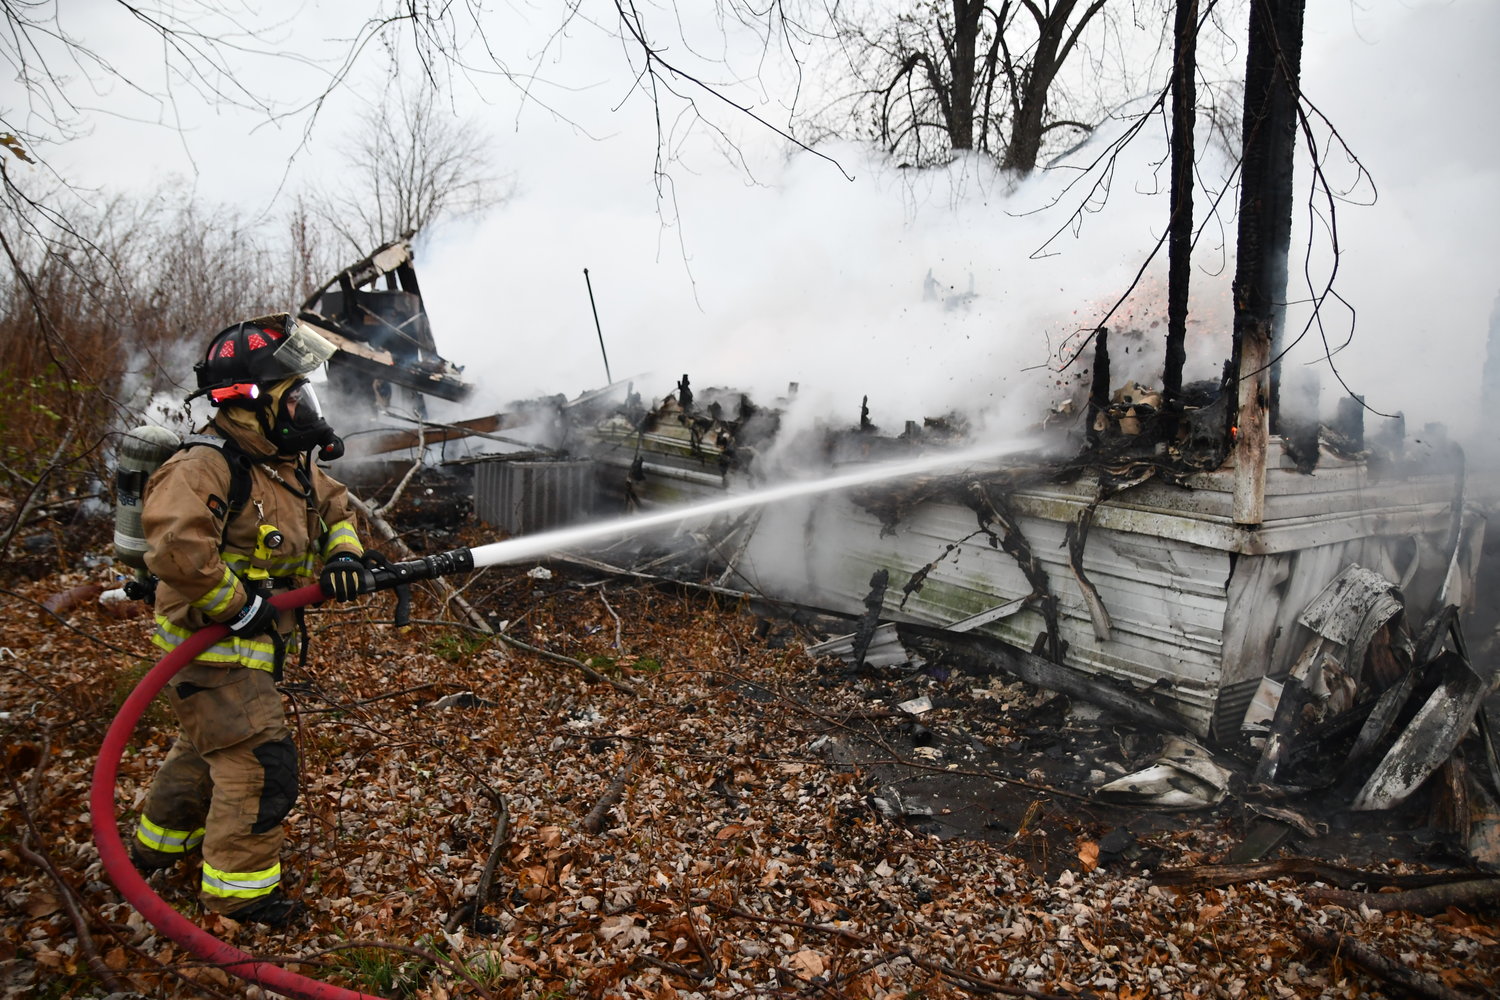 A FIREMAN extinguishes a hot spot Thursday morning on a fire which destroyed a rural Owensville man’s mobile home off of Farris Road. The man and his dogs had been sleeping in his truck which he said was cheaper to heat than the trailer unit. Volunteer firemen from several area departments and fire protection districts responded to the call on Thanksgiving for mutual aid manpower assistance at the site of the early-morning fire.